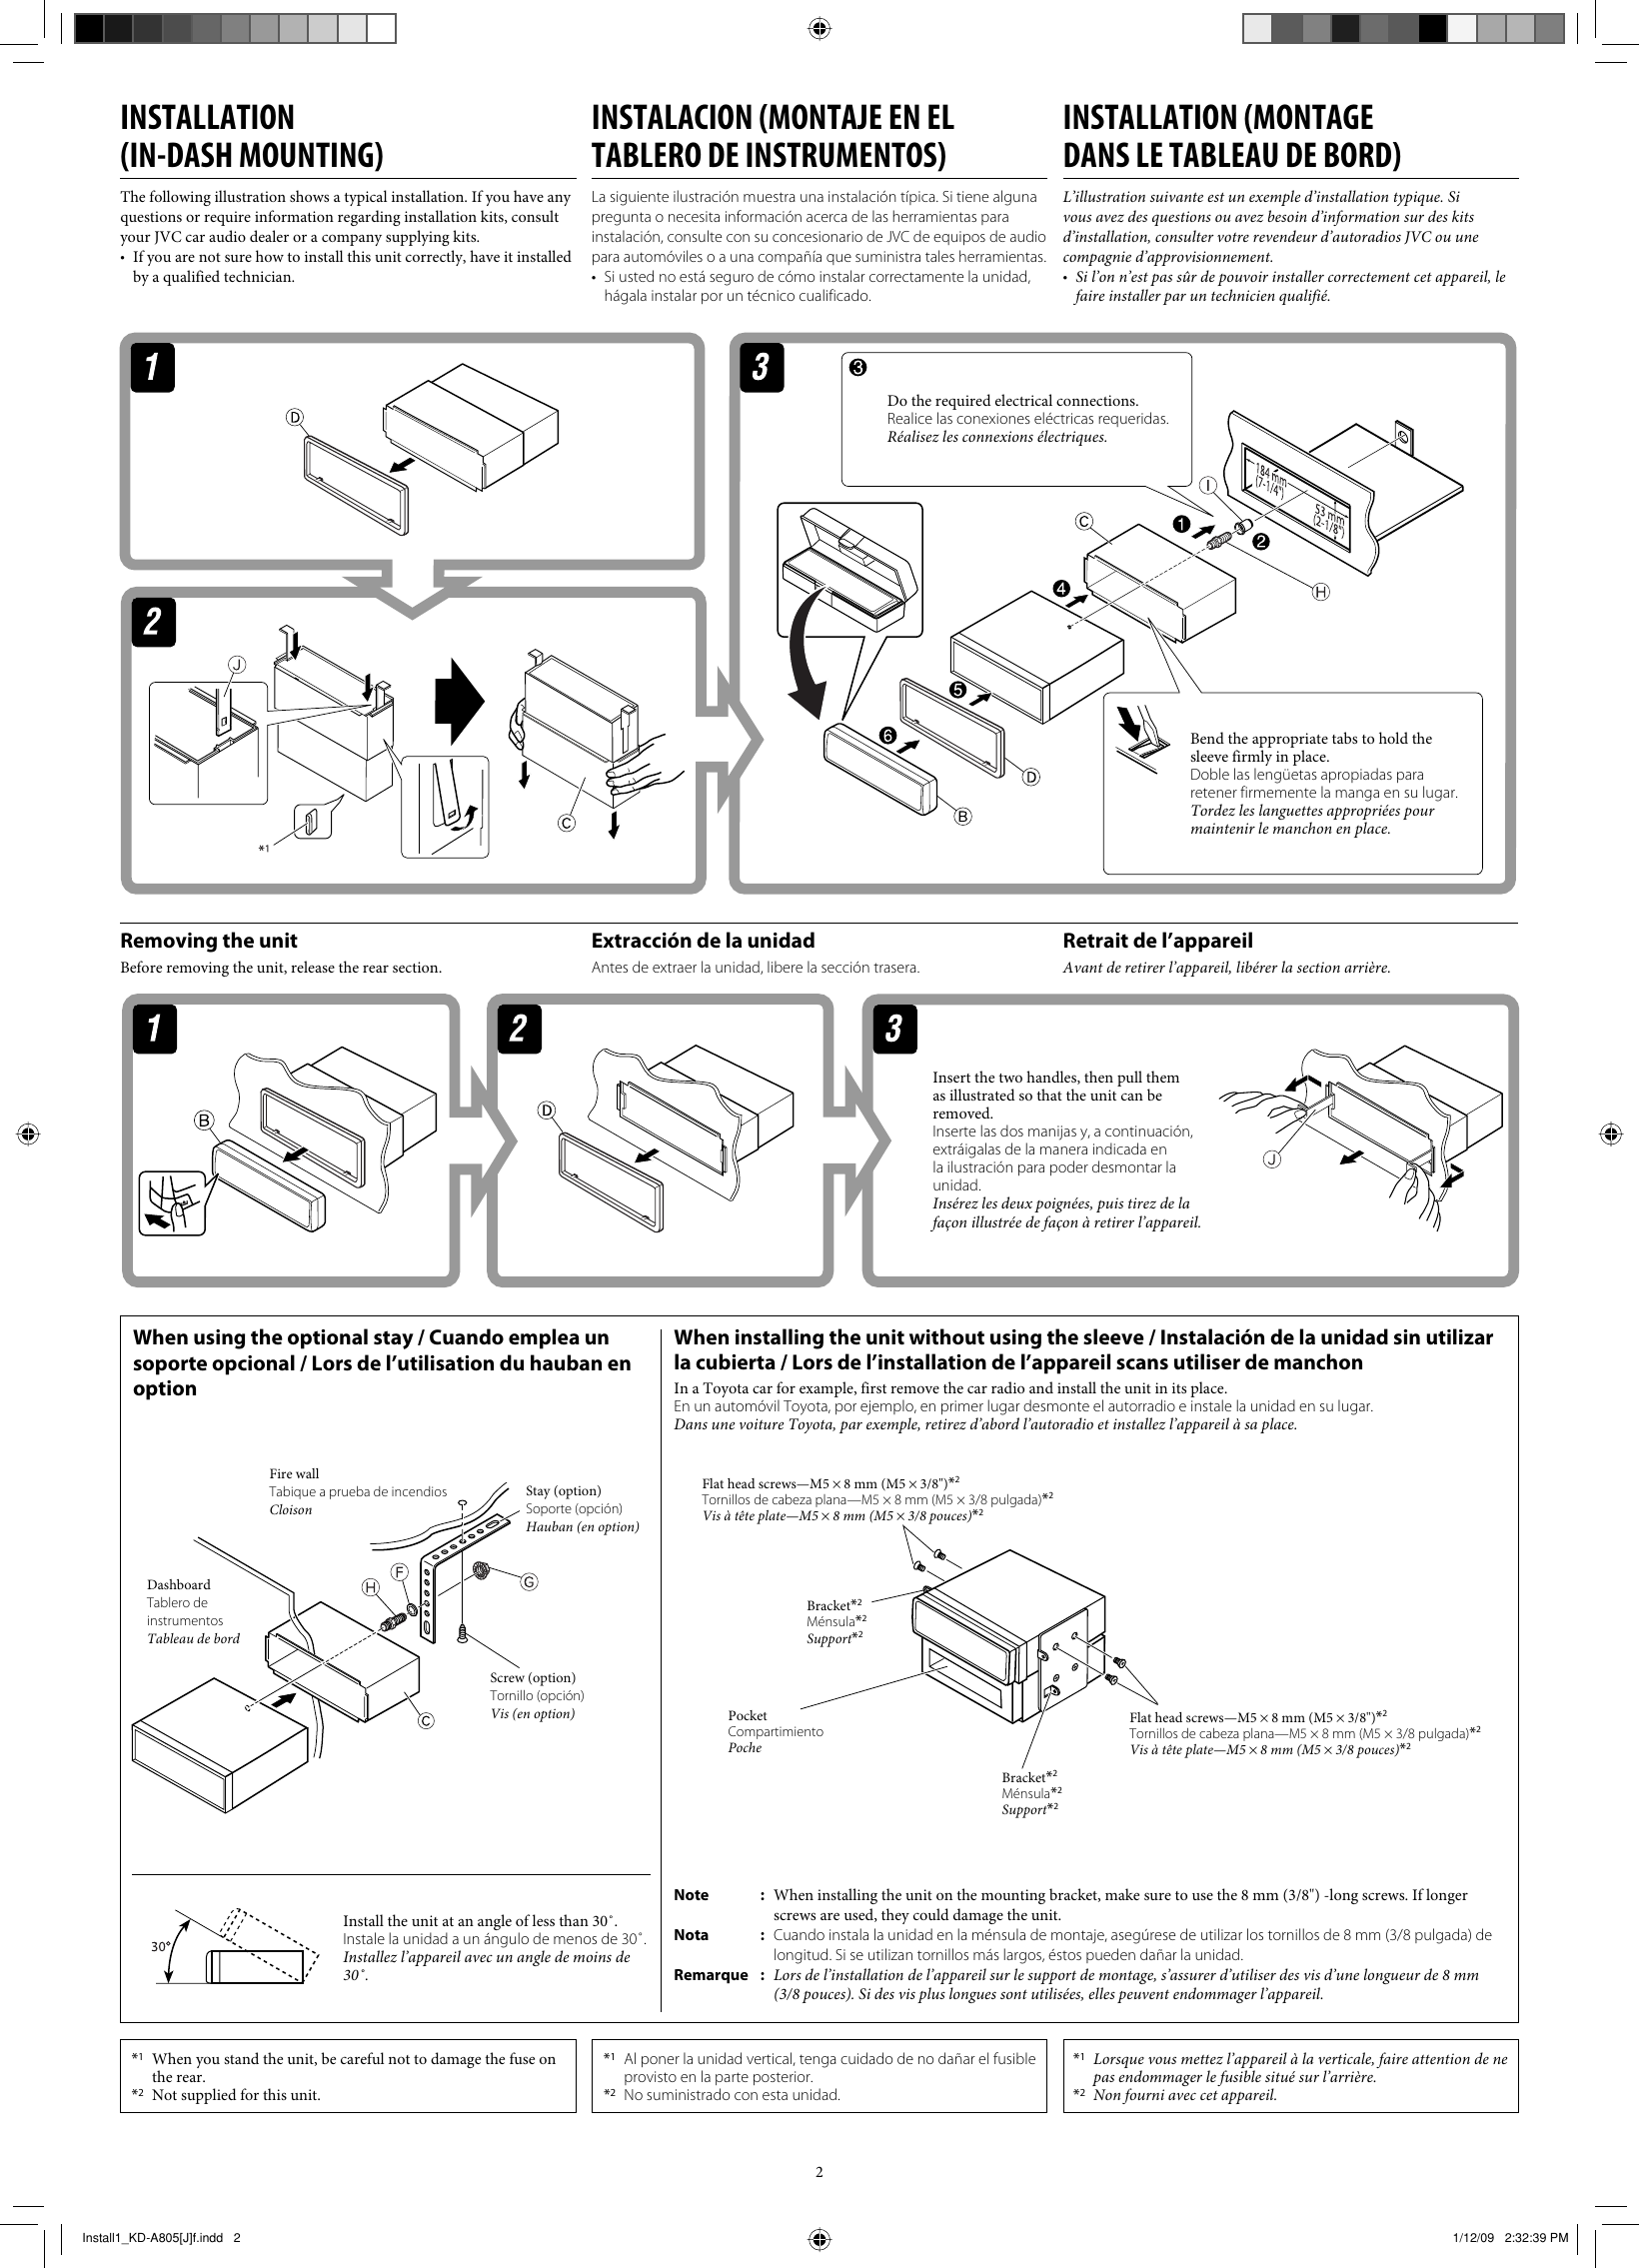 Page 2 of 6 - Jvc Jvc-Cd-Receiver-Kd-A805-Users-Manual- Install1_KD-A805[J]f  Jvc-cd-receiver-kd-a805-users-manual